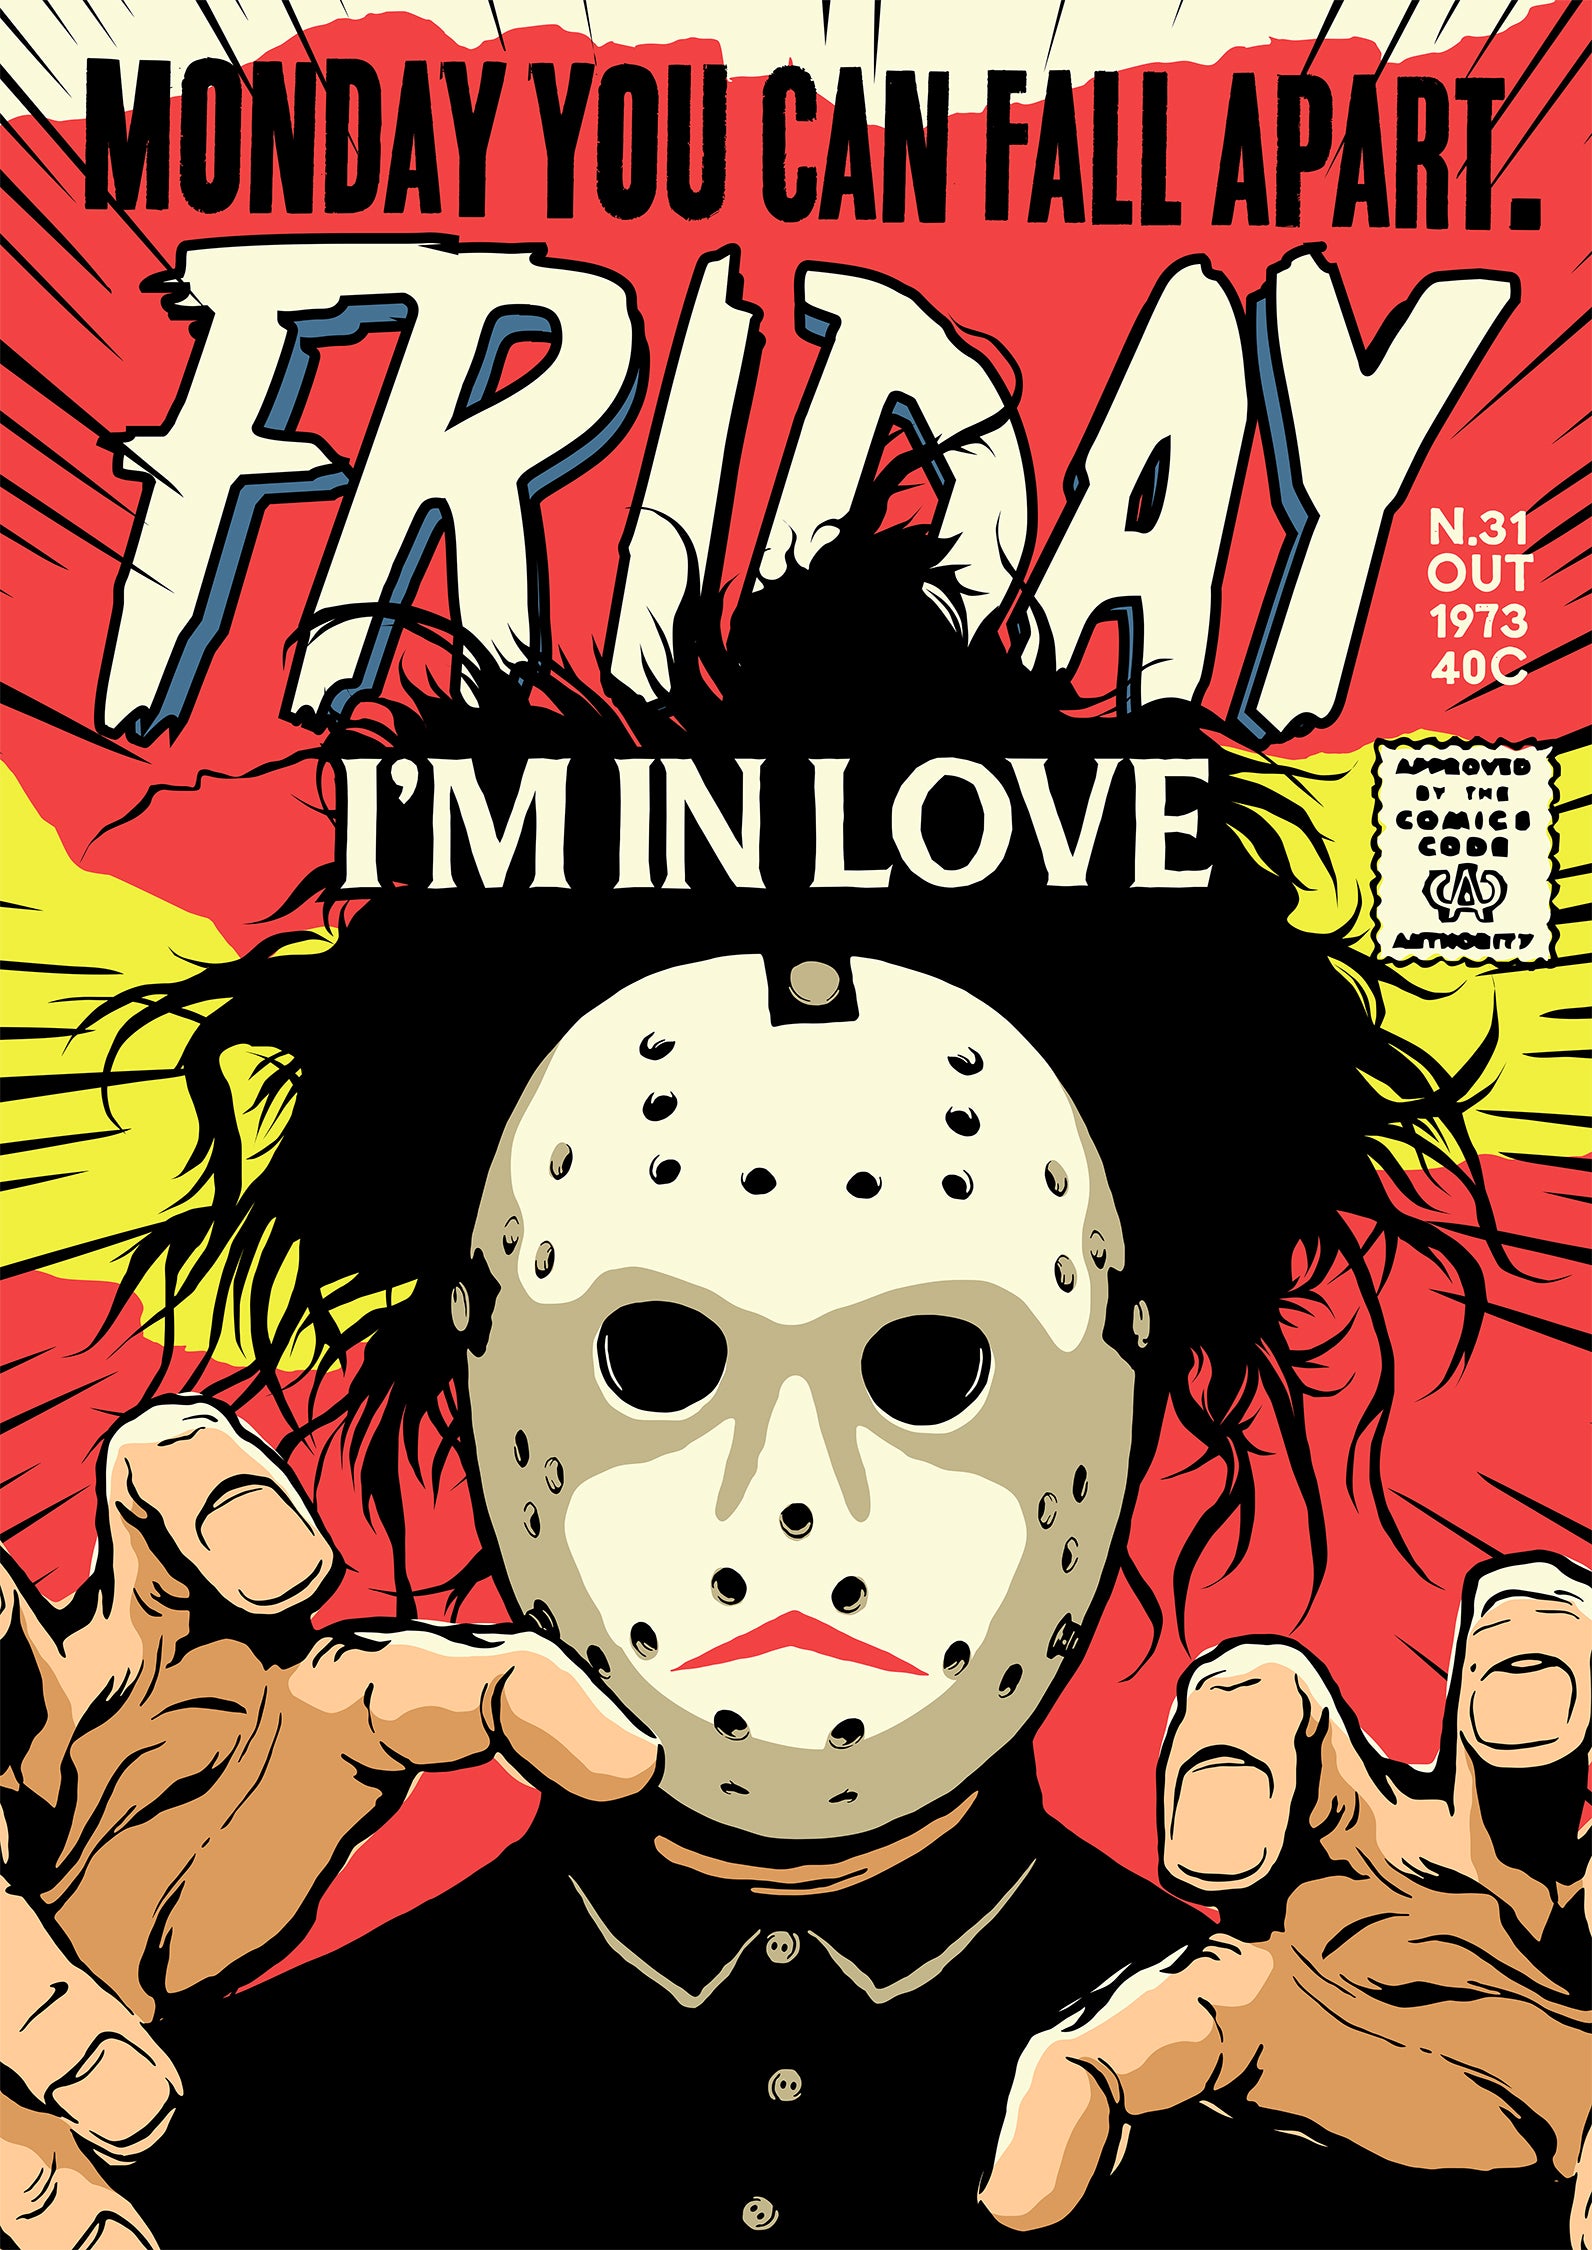 "Friday I'm in Love" by Butcher Billy